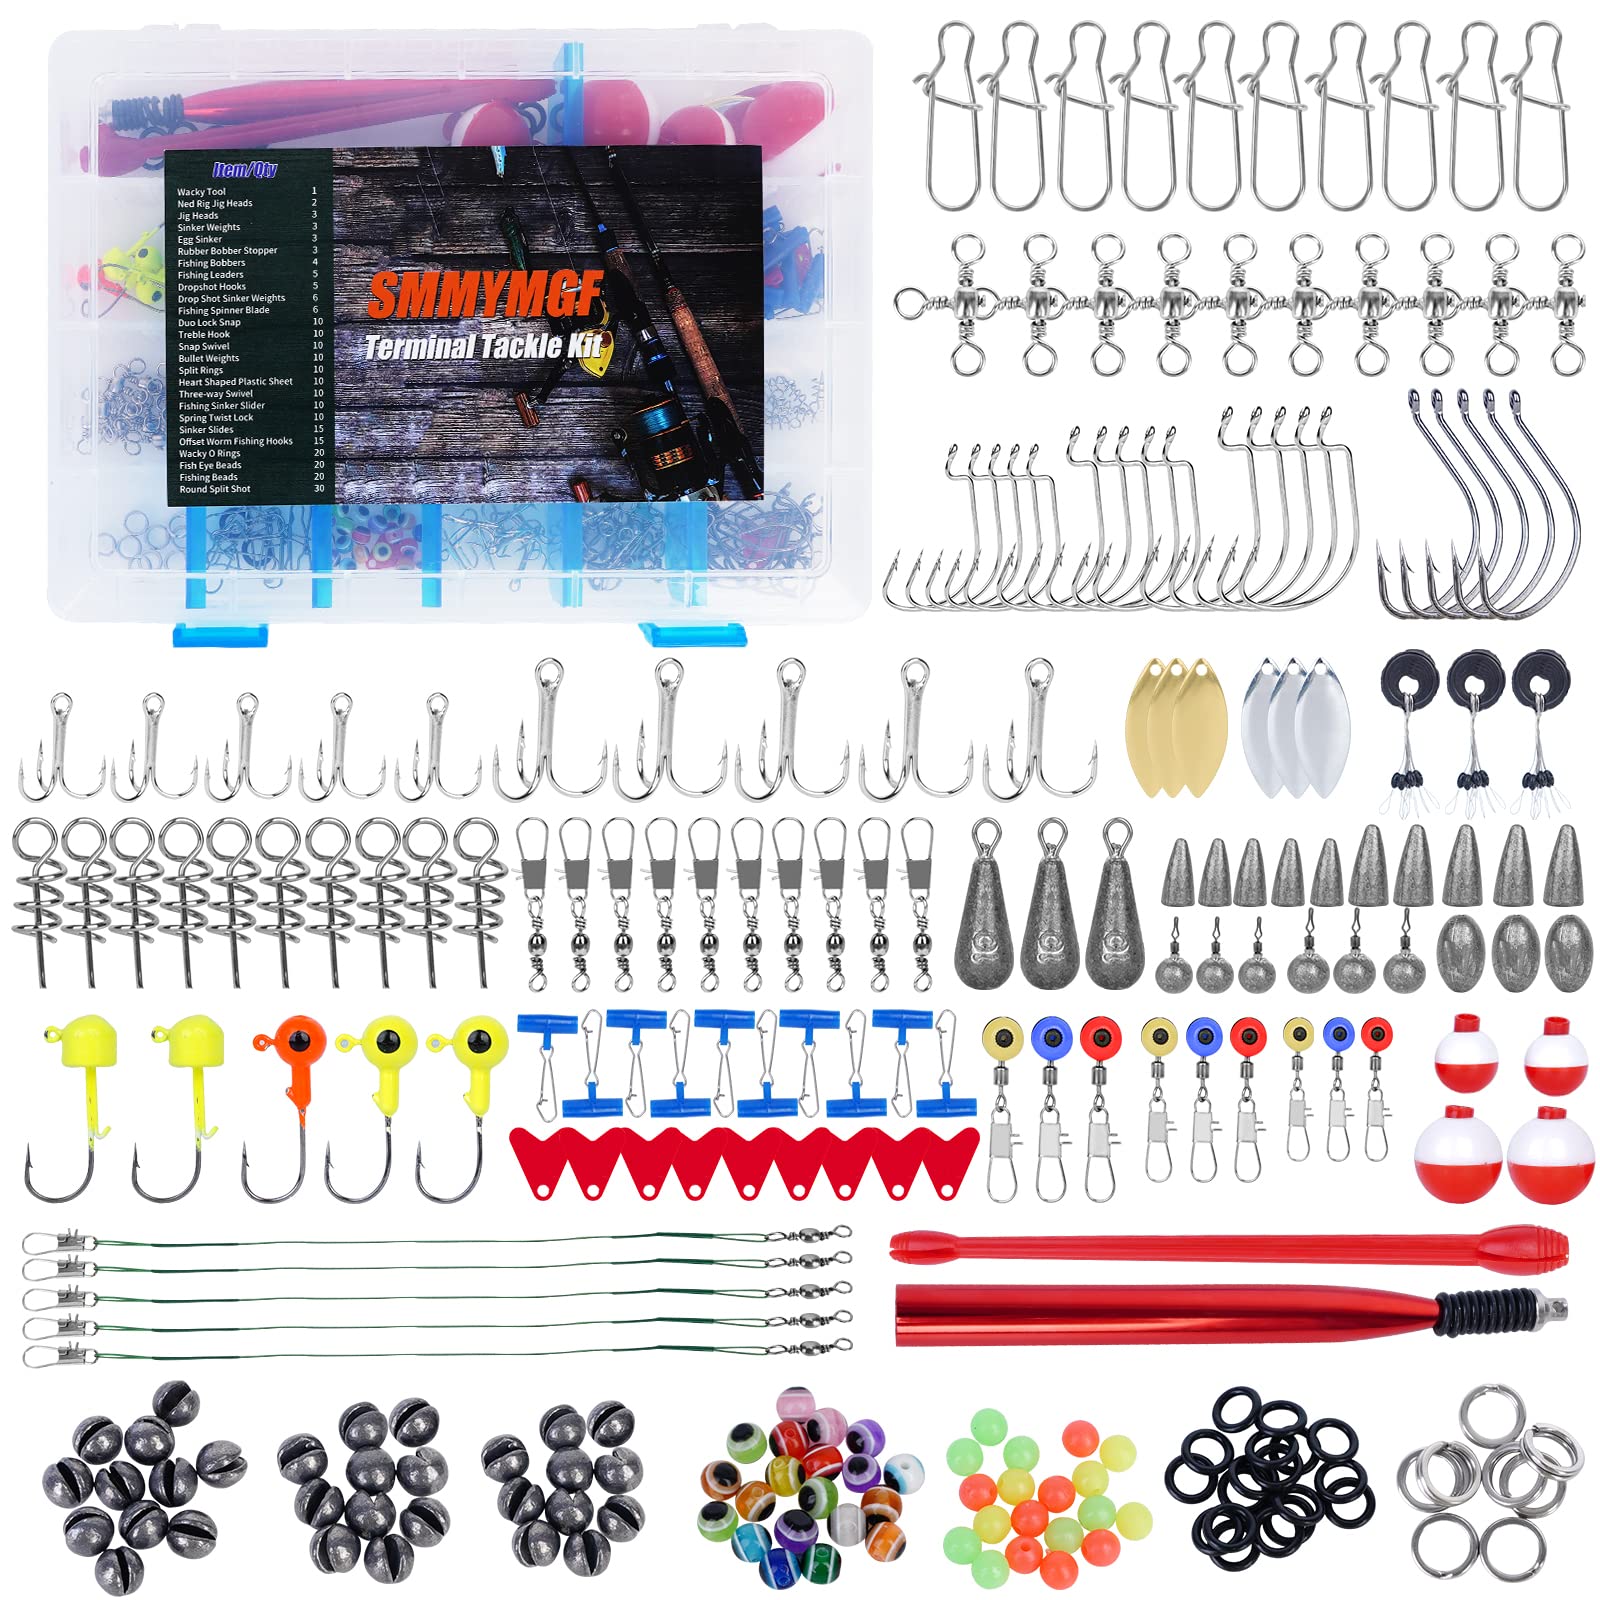 Fishing Lures Tackle Box Bass Fishing Kit,Saltwater and Freshwater Lures Fishing  Gear Including Fishing Accessories and Fishing Equipment for Bass,Trout,  Salmon 253pcs Fishing Tackle Box